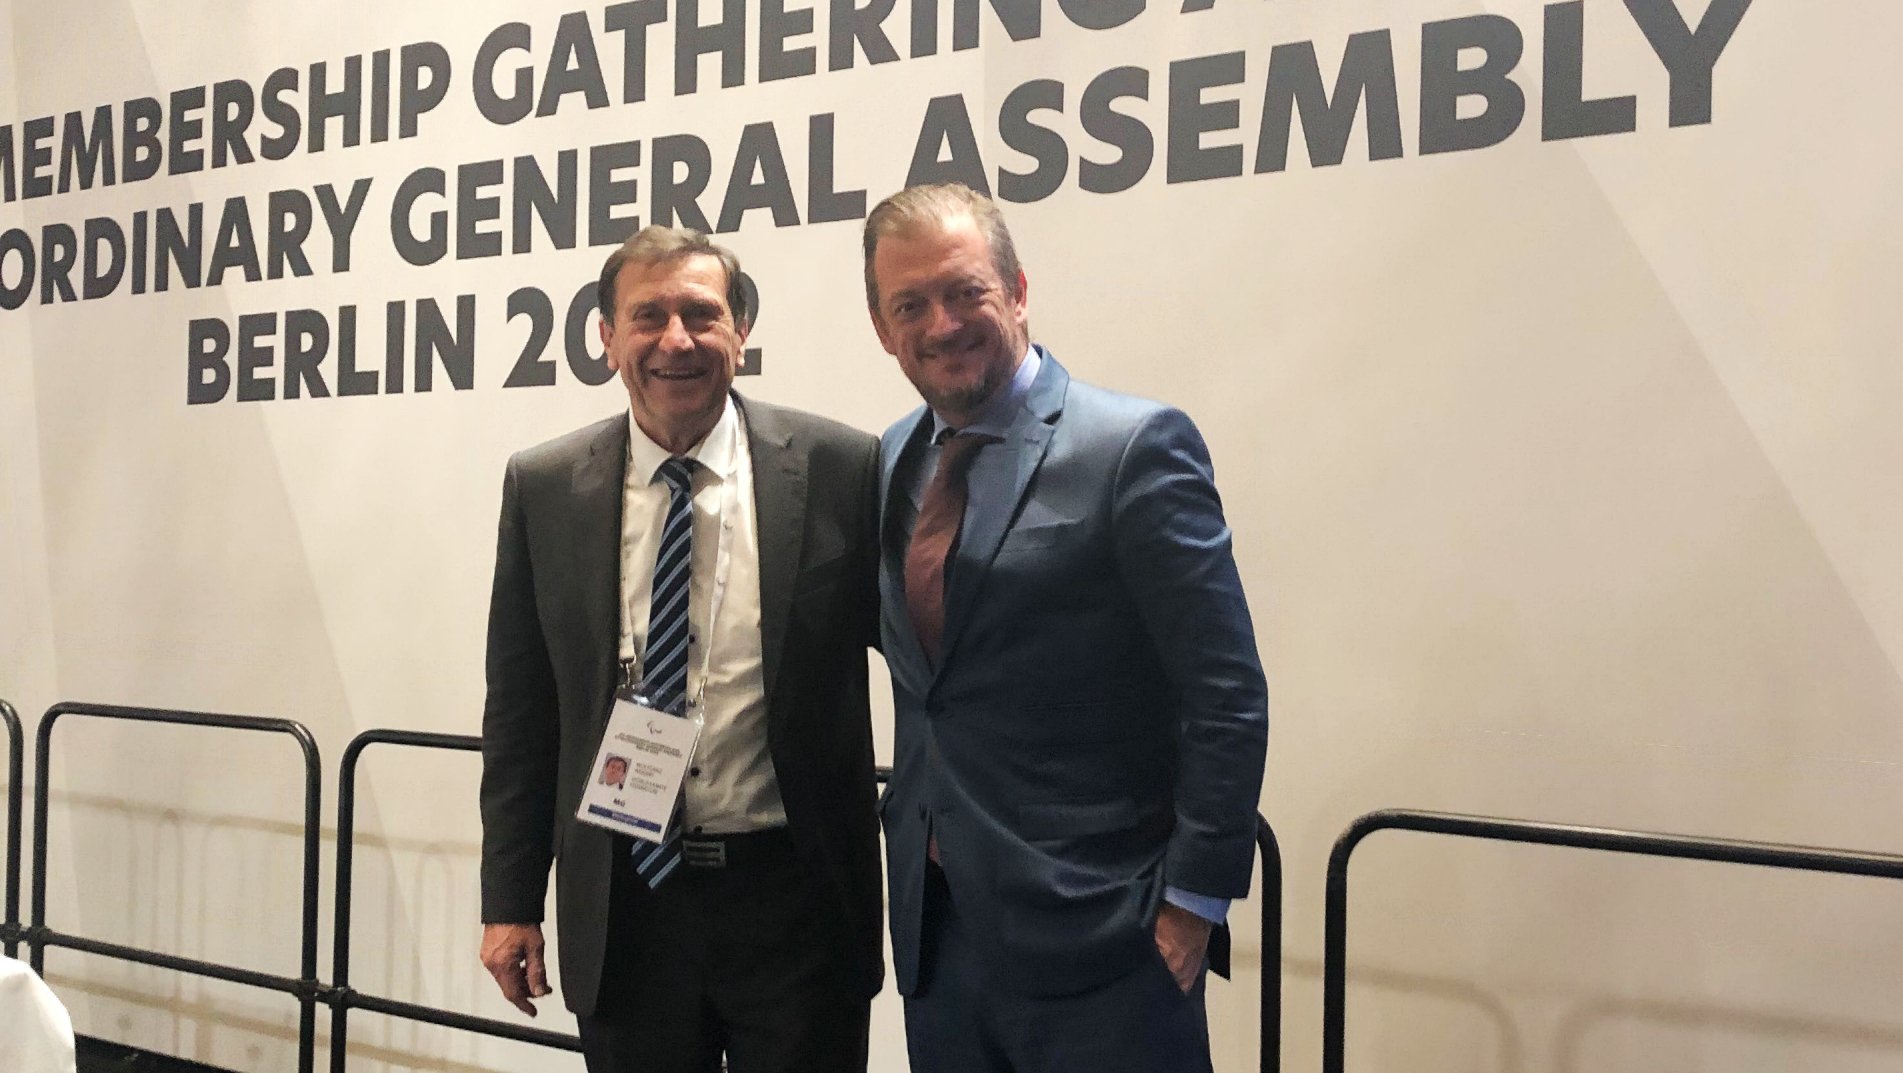 WKF attends IPC's Extraordinary General Assembly and Membership Gathering